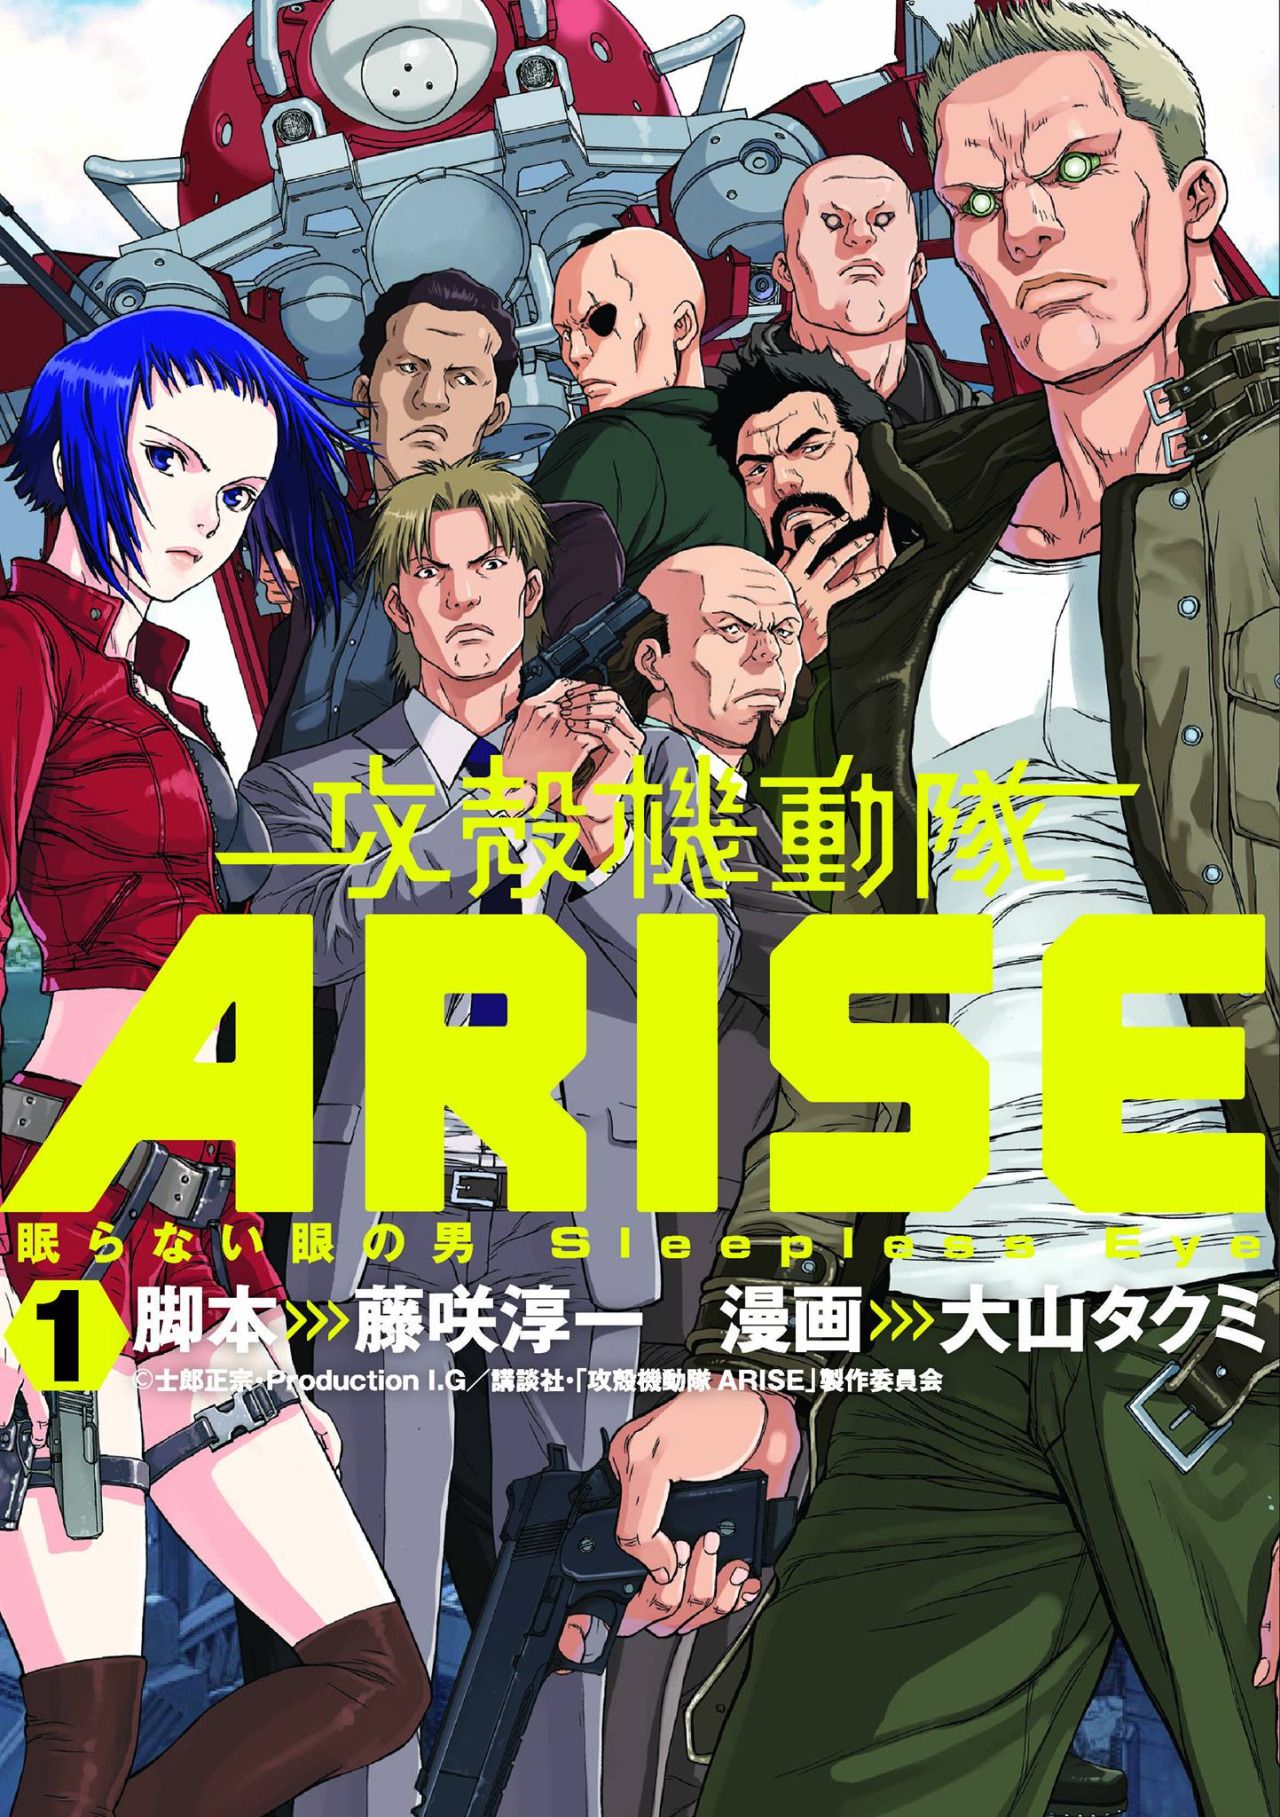 Ghost in the shell: Arise